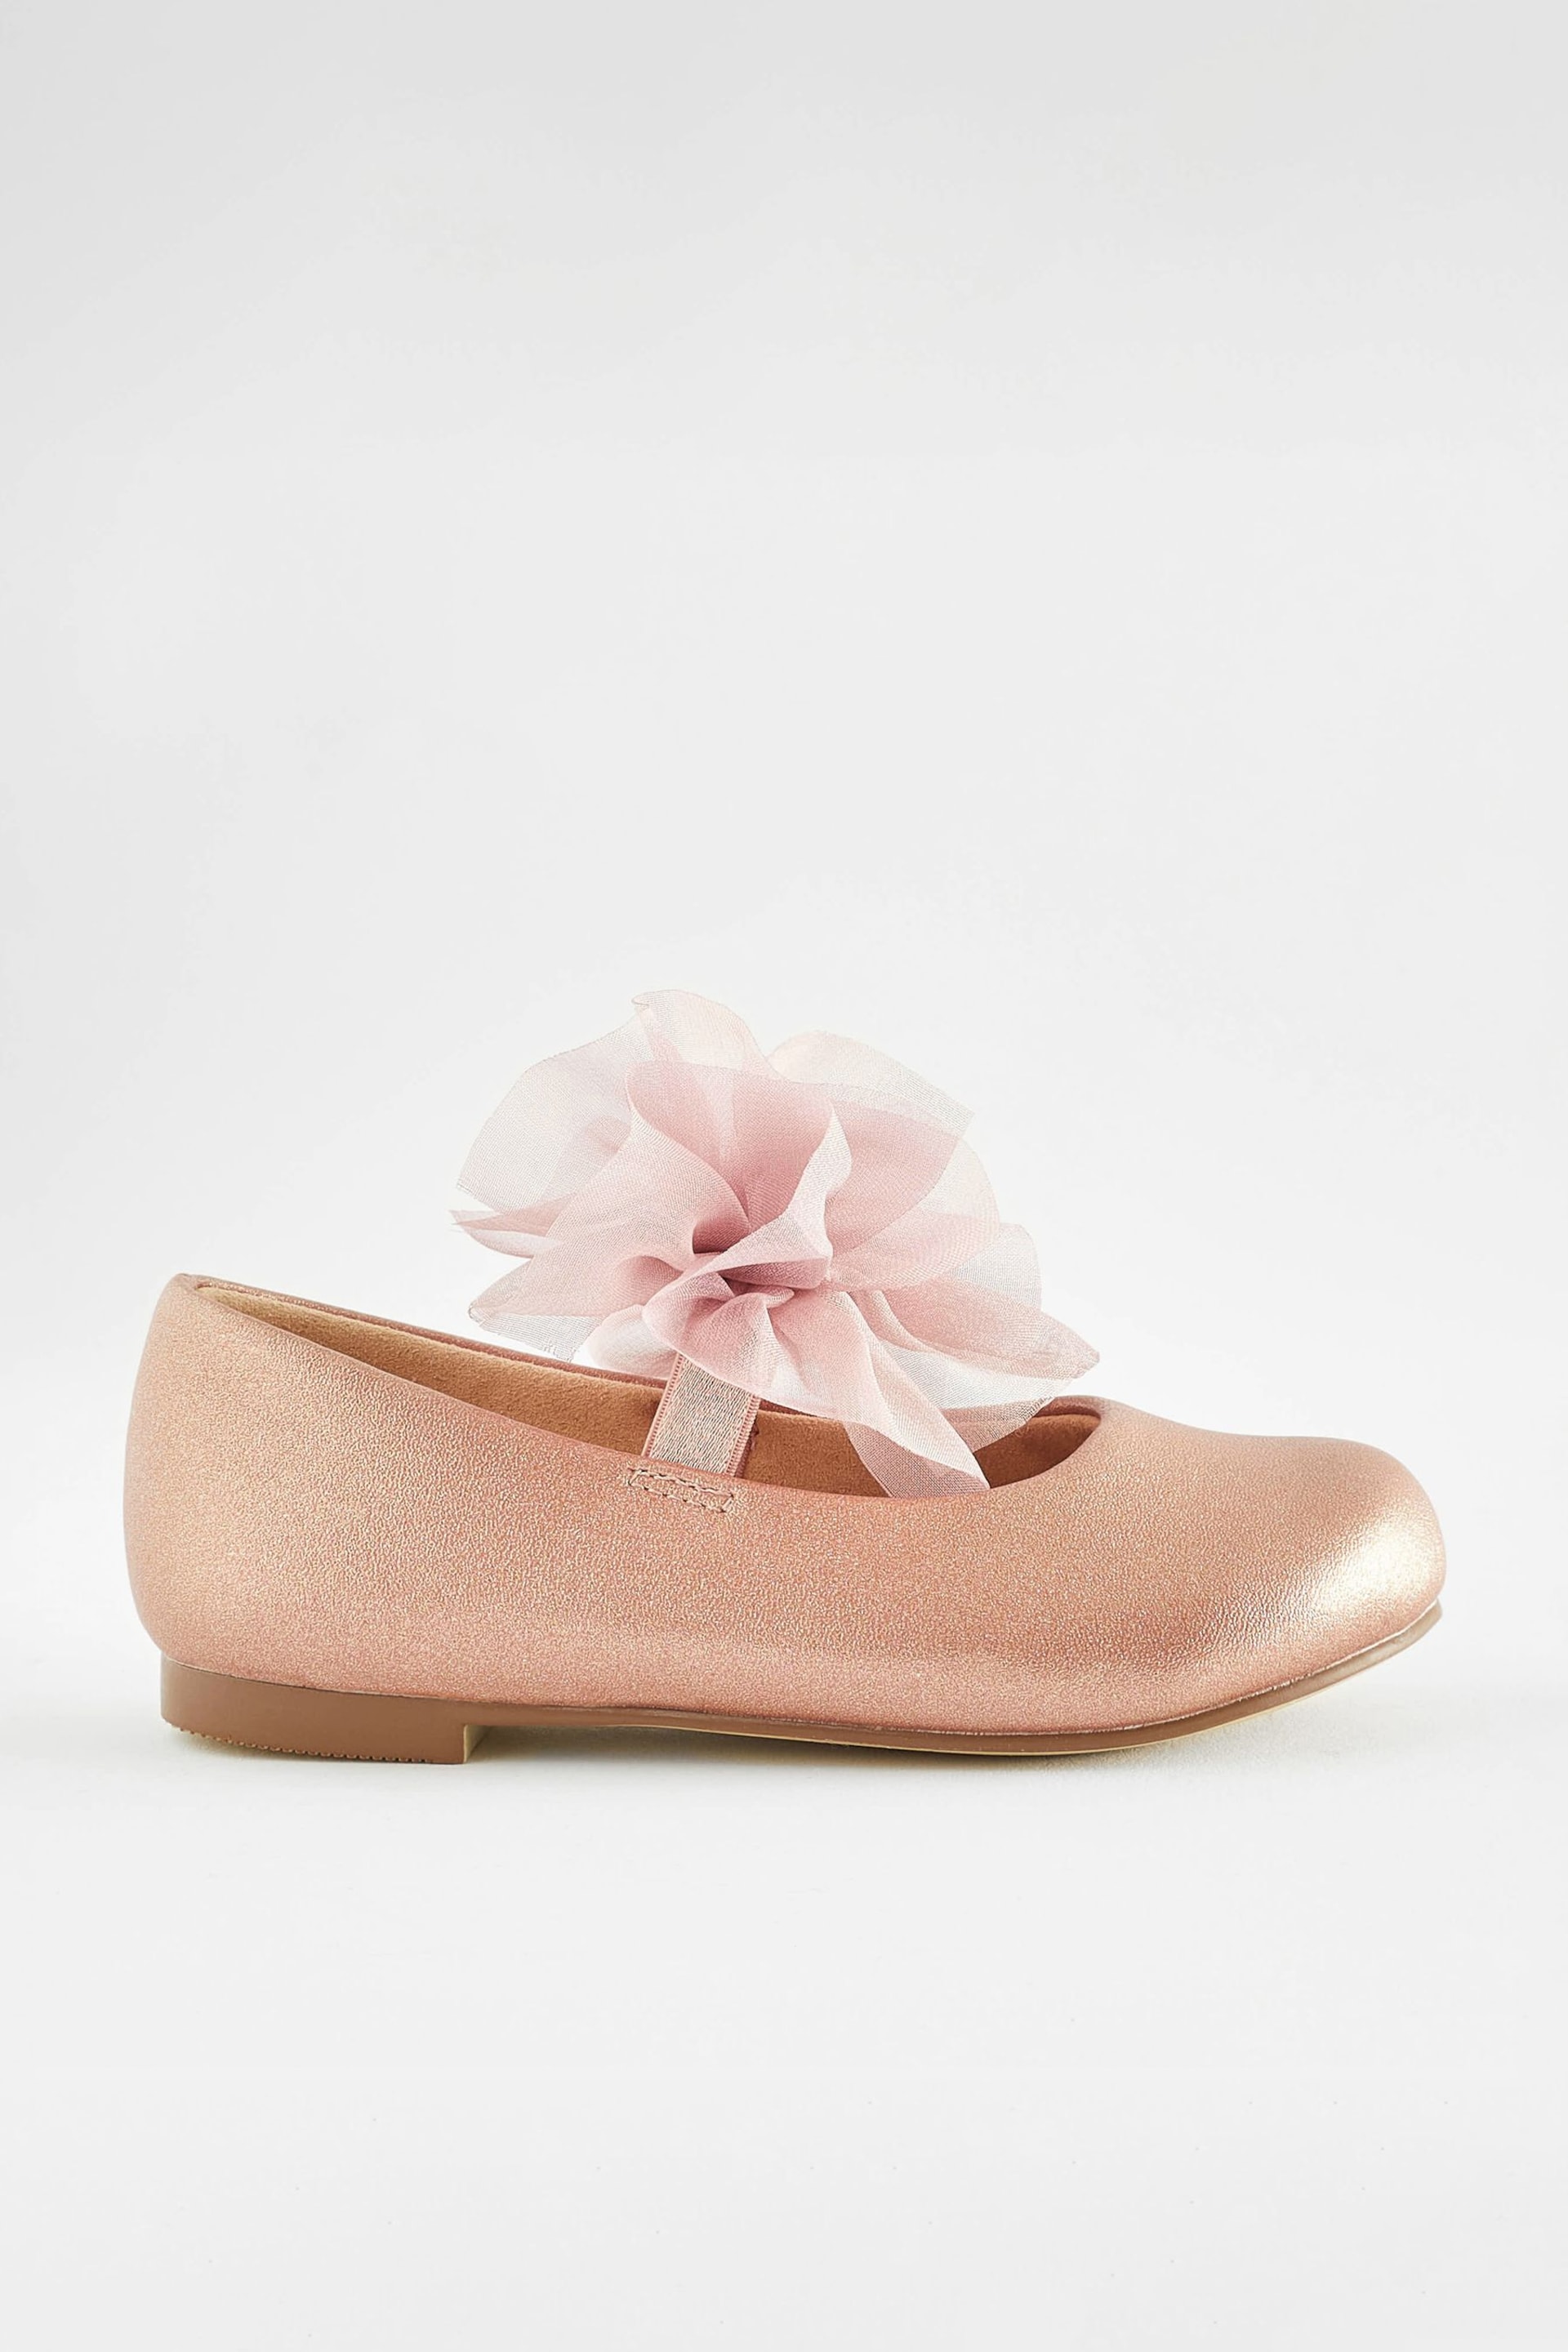 Pink Wide Fit (G) Mary Jane Bridesmaid Bow Occasion Shoes - Image 2 of 5